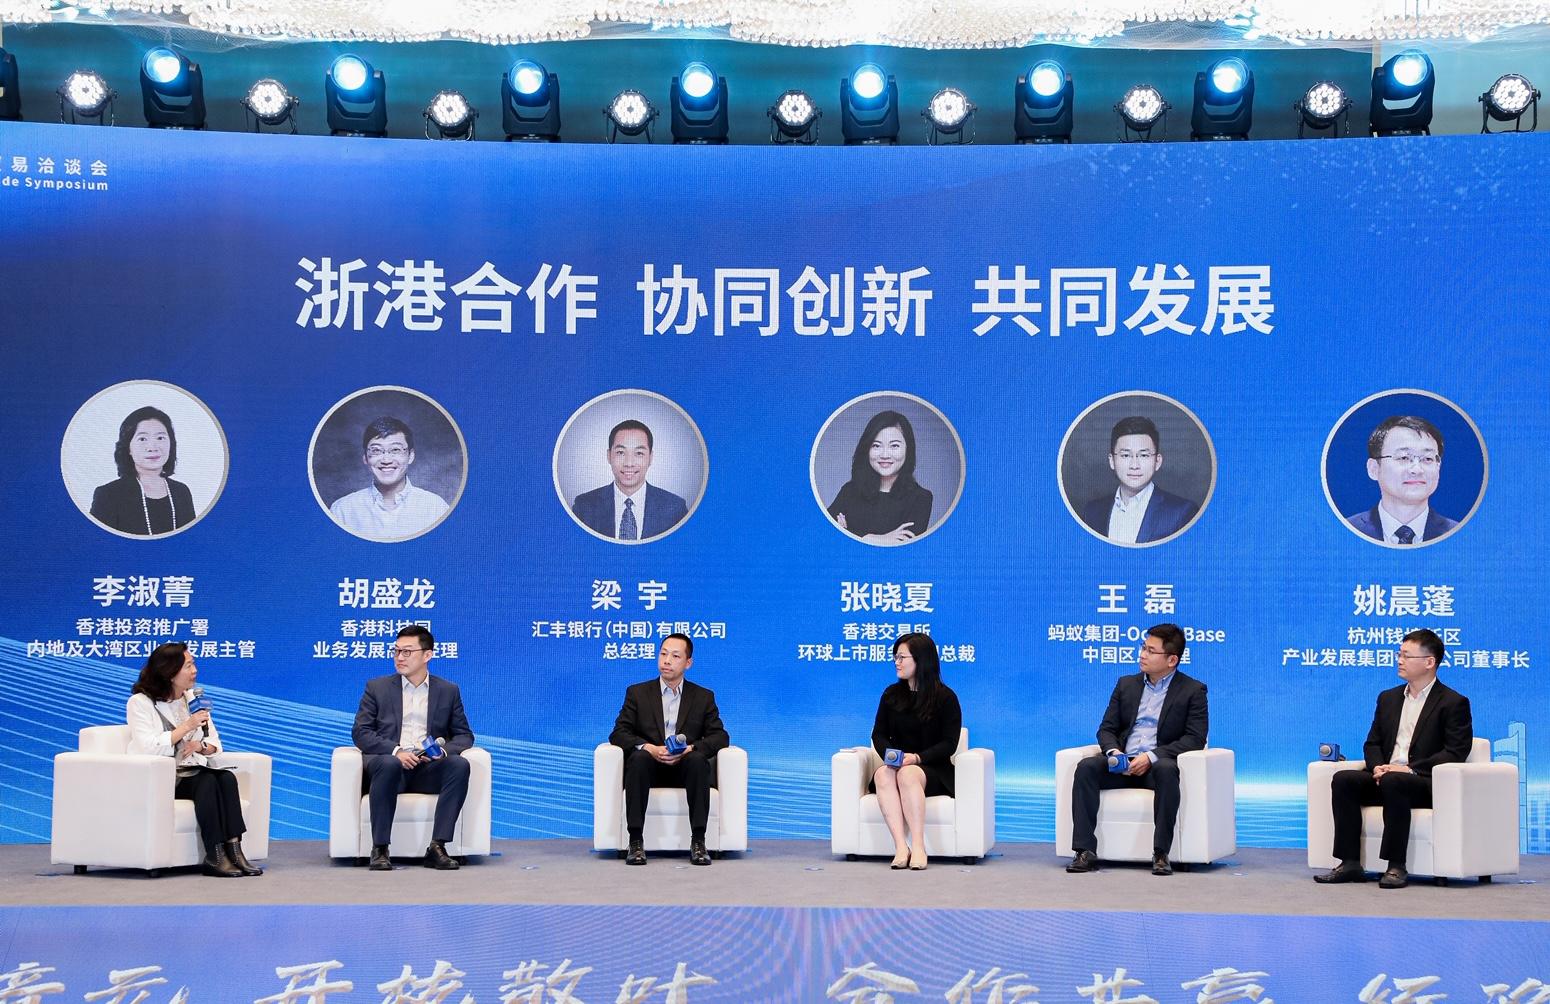 Invest Hong Kong (InvestHK) and Mainland government authorities co-hosted a forum in Hangzhou, Zhejiang Province today (May 18), encouraging Zhejiang enterprises to make use of Hong Kong's business advantages and opportunities in innovation development amid the Belt and Road Initiative and the Guangdong-Hong Kong-Macao Greater Bay Area (GBA) development to accelerate their overseas expansion. Photo shows the Head of Mainland and GBA Business Development of InvestHK, Ms Loretta Lee (first left), hosting a panel discussion on Zhejiang-Hong Kong collaborative innovation at the forum with speakers including Senior Manager of Business Development of Hong Kong Science and Technology Parks Corporation Mr Matt Hu (second left); the Country Head of Technology and Healthcare Sector of HSBC Bank (China) Company Limited, Mr Ray Y Liang (third left); and Vice President of Global Issuer Services of Hong Kong Exchanges and Clearing Limited Ms Sarah Zhang (third right). Zhejiang company representatives; the China Business General Manager of Ant Group-OceanBase, Mr Frank Wang (second right); and the Managing Director of Hangzhou Qiantang New Area Industrial Development Group Co Ltd, Mr Yao Chenpeng (first right), also share their experience in collaborative innovation at the forum.
